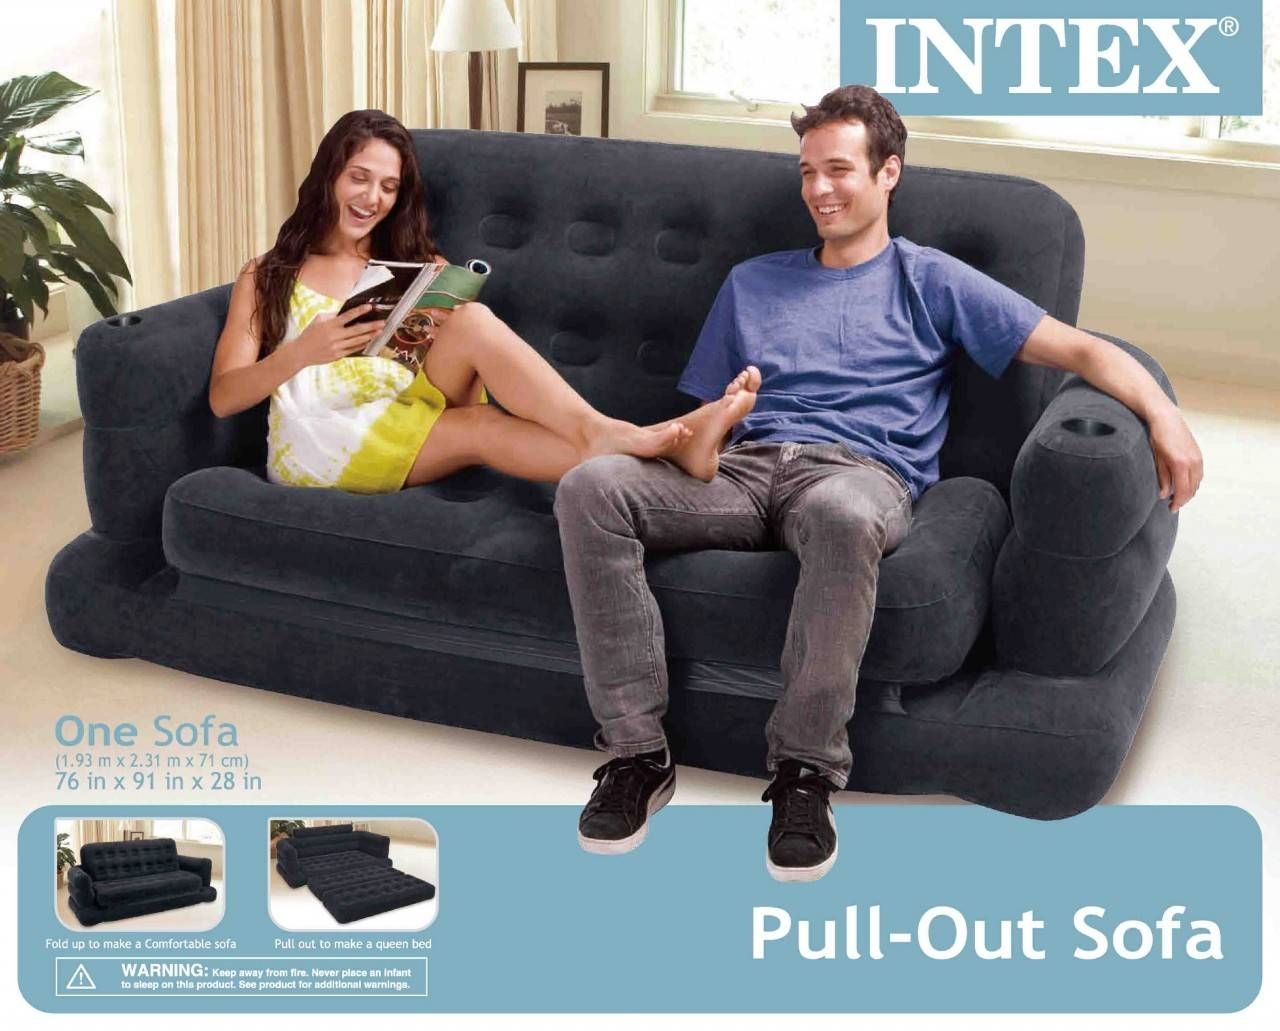 Intex Inflatable Pull Out Sofa And Queen Air Mattress For Intex Queen Sleeper Sofas (View 3 of 15)